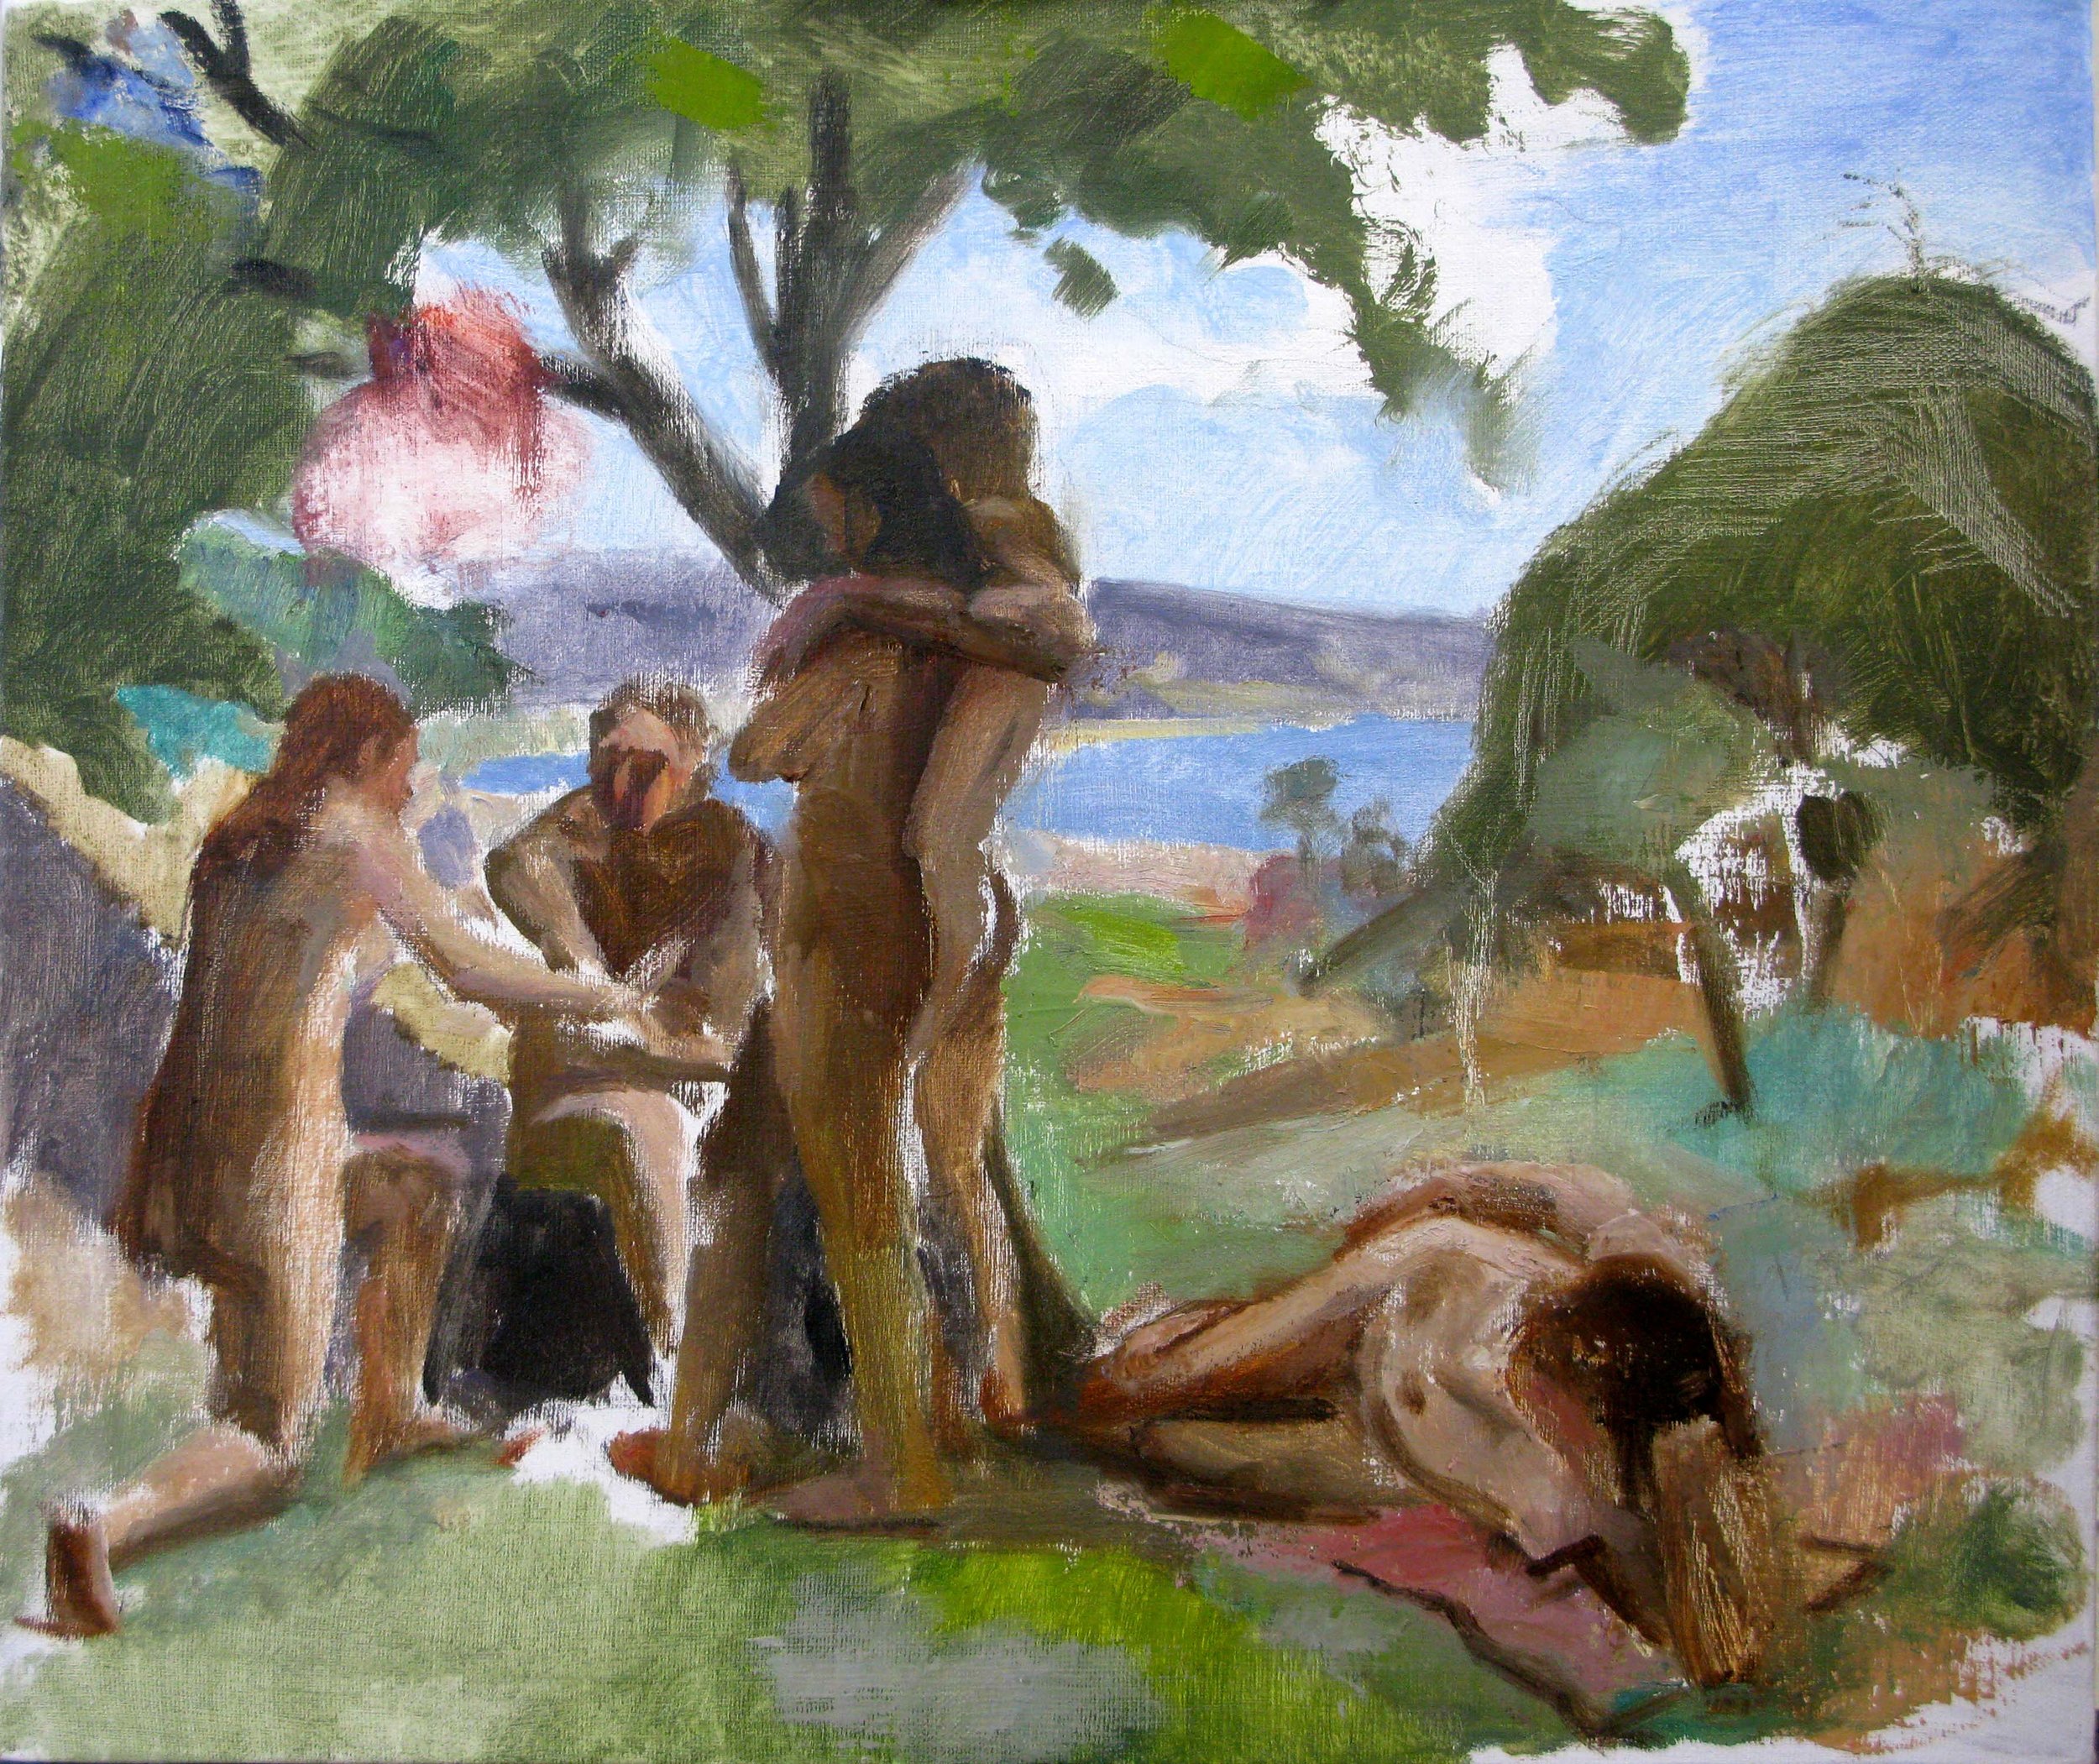 Five Nudes in a Landscape, 17 x 21 inches, oil on linen, 2009.